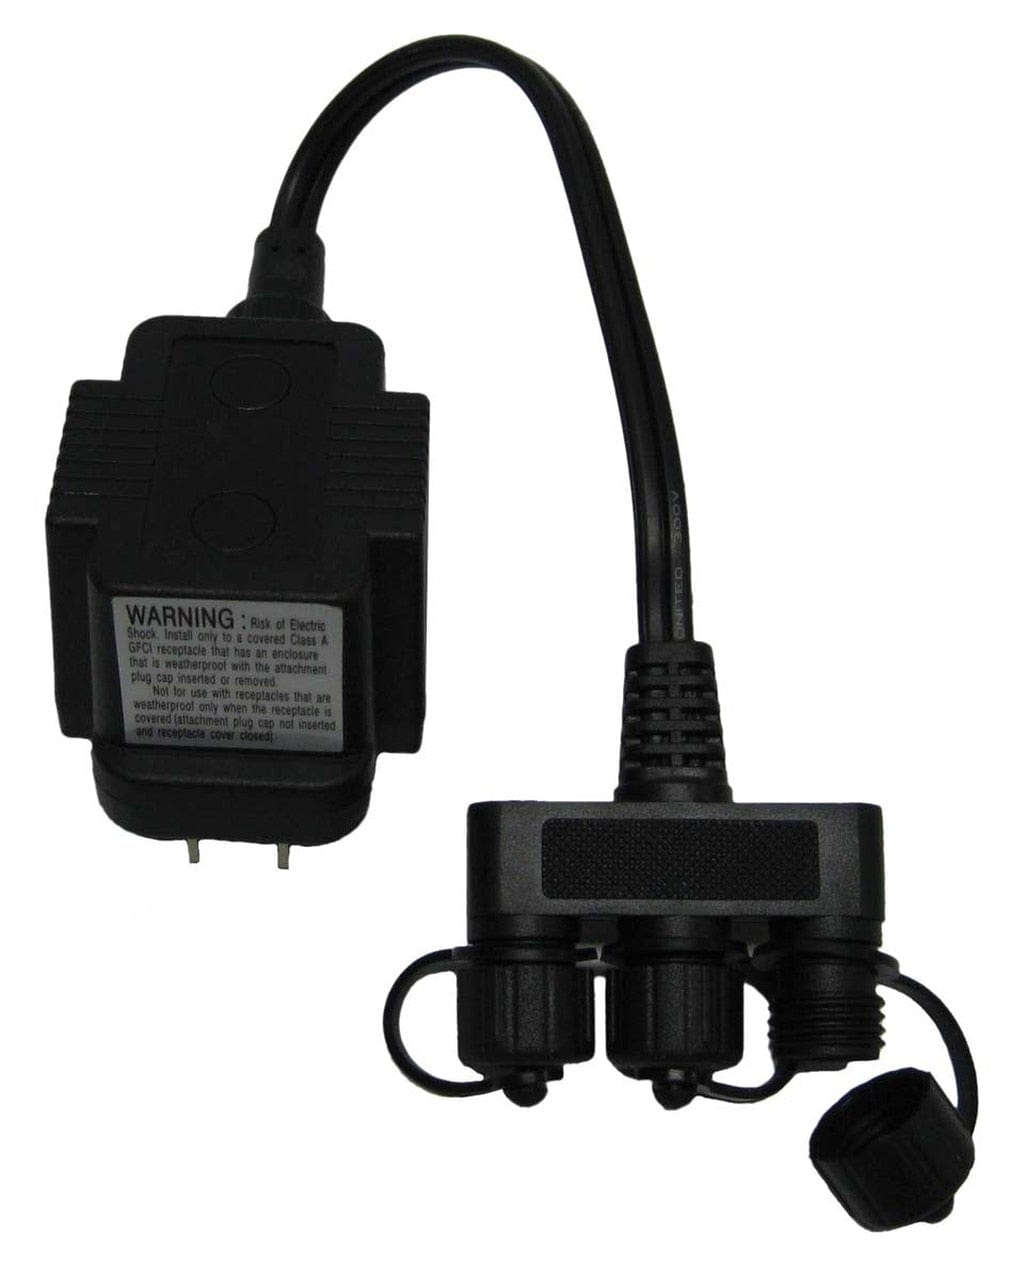 EasyPro Lighting and Transformers EasyPro Transformer w/ 3 Quick Connects - 10 Watt